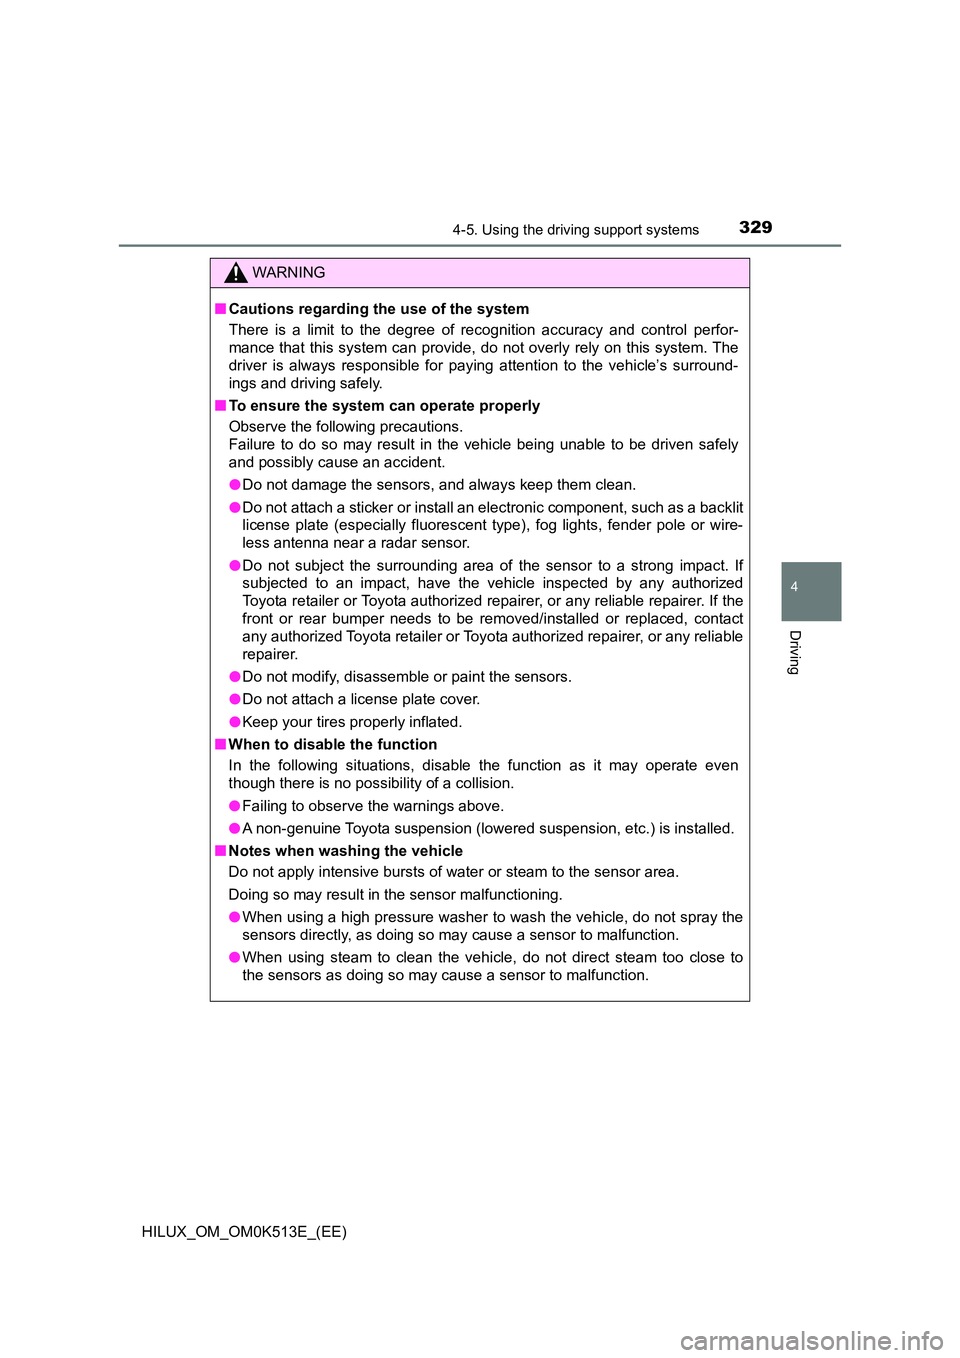 TOYOTA HILUX 2021  Owners Manual (in English) 3294-5. Using the driving support systems
4
Driving
HILUX_OM_OM0K513E_(EE)
WARNING
�QCautions regarding the use of the system 
There is a limit to the degree of recognition accuracy and control perfor